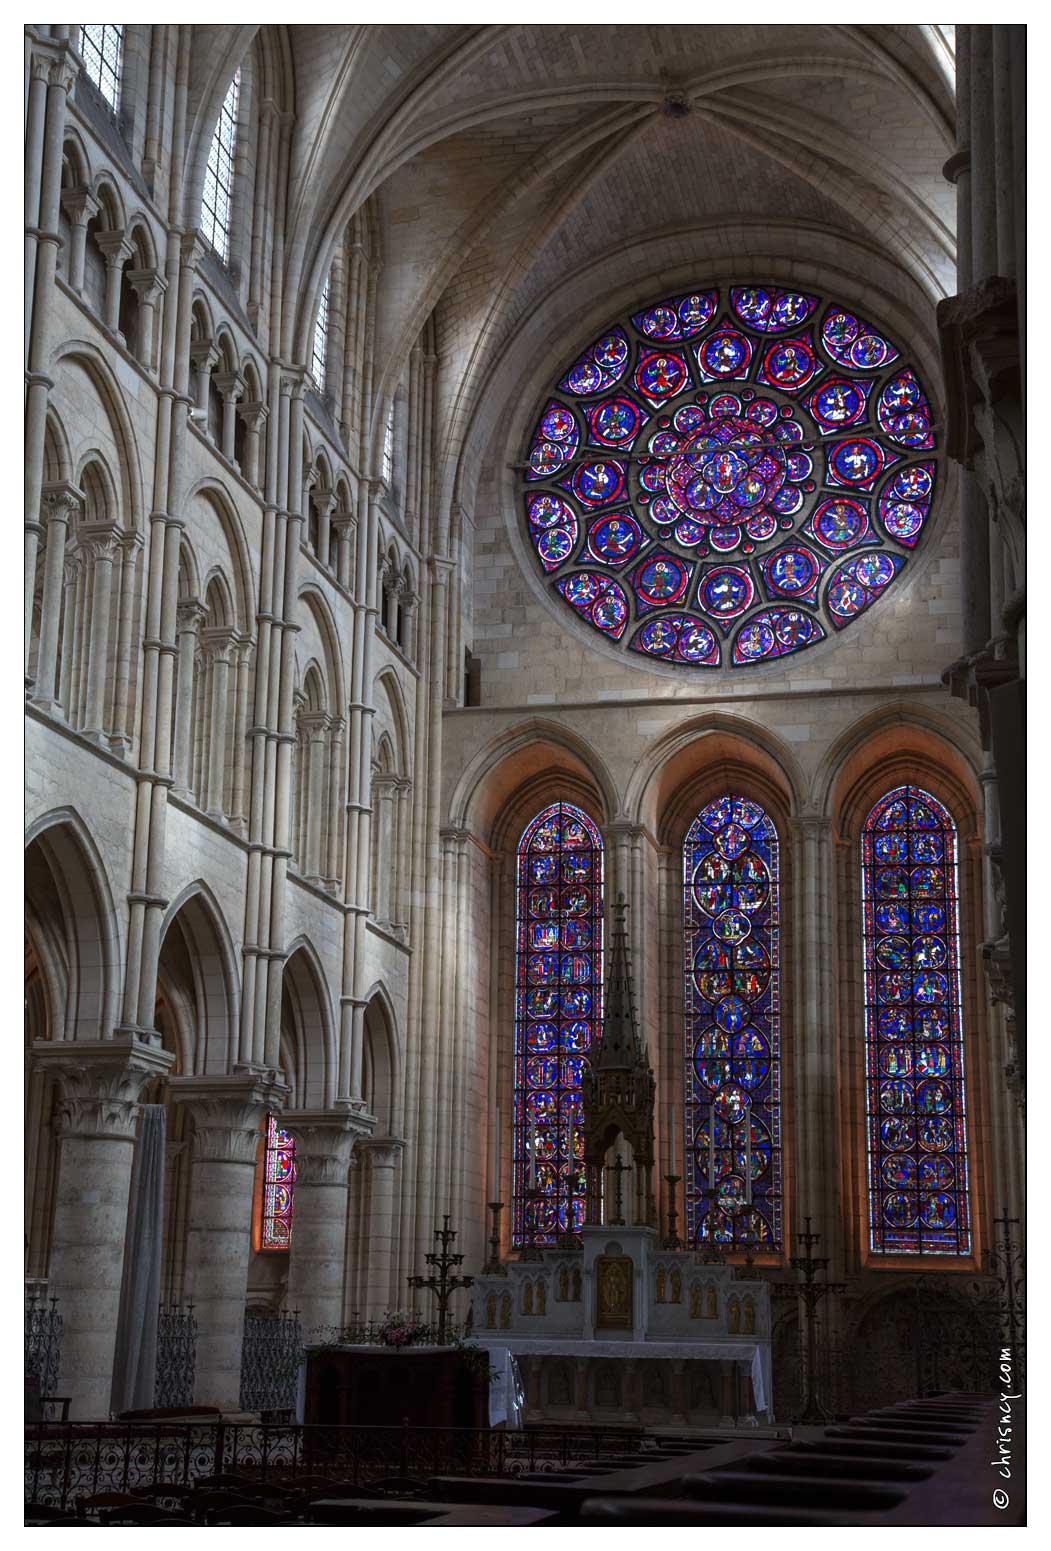 20150406-42_0268-Laon_cathedrale.jpg